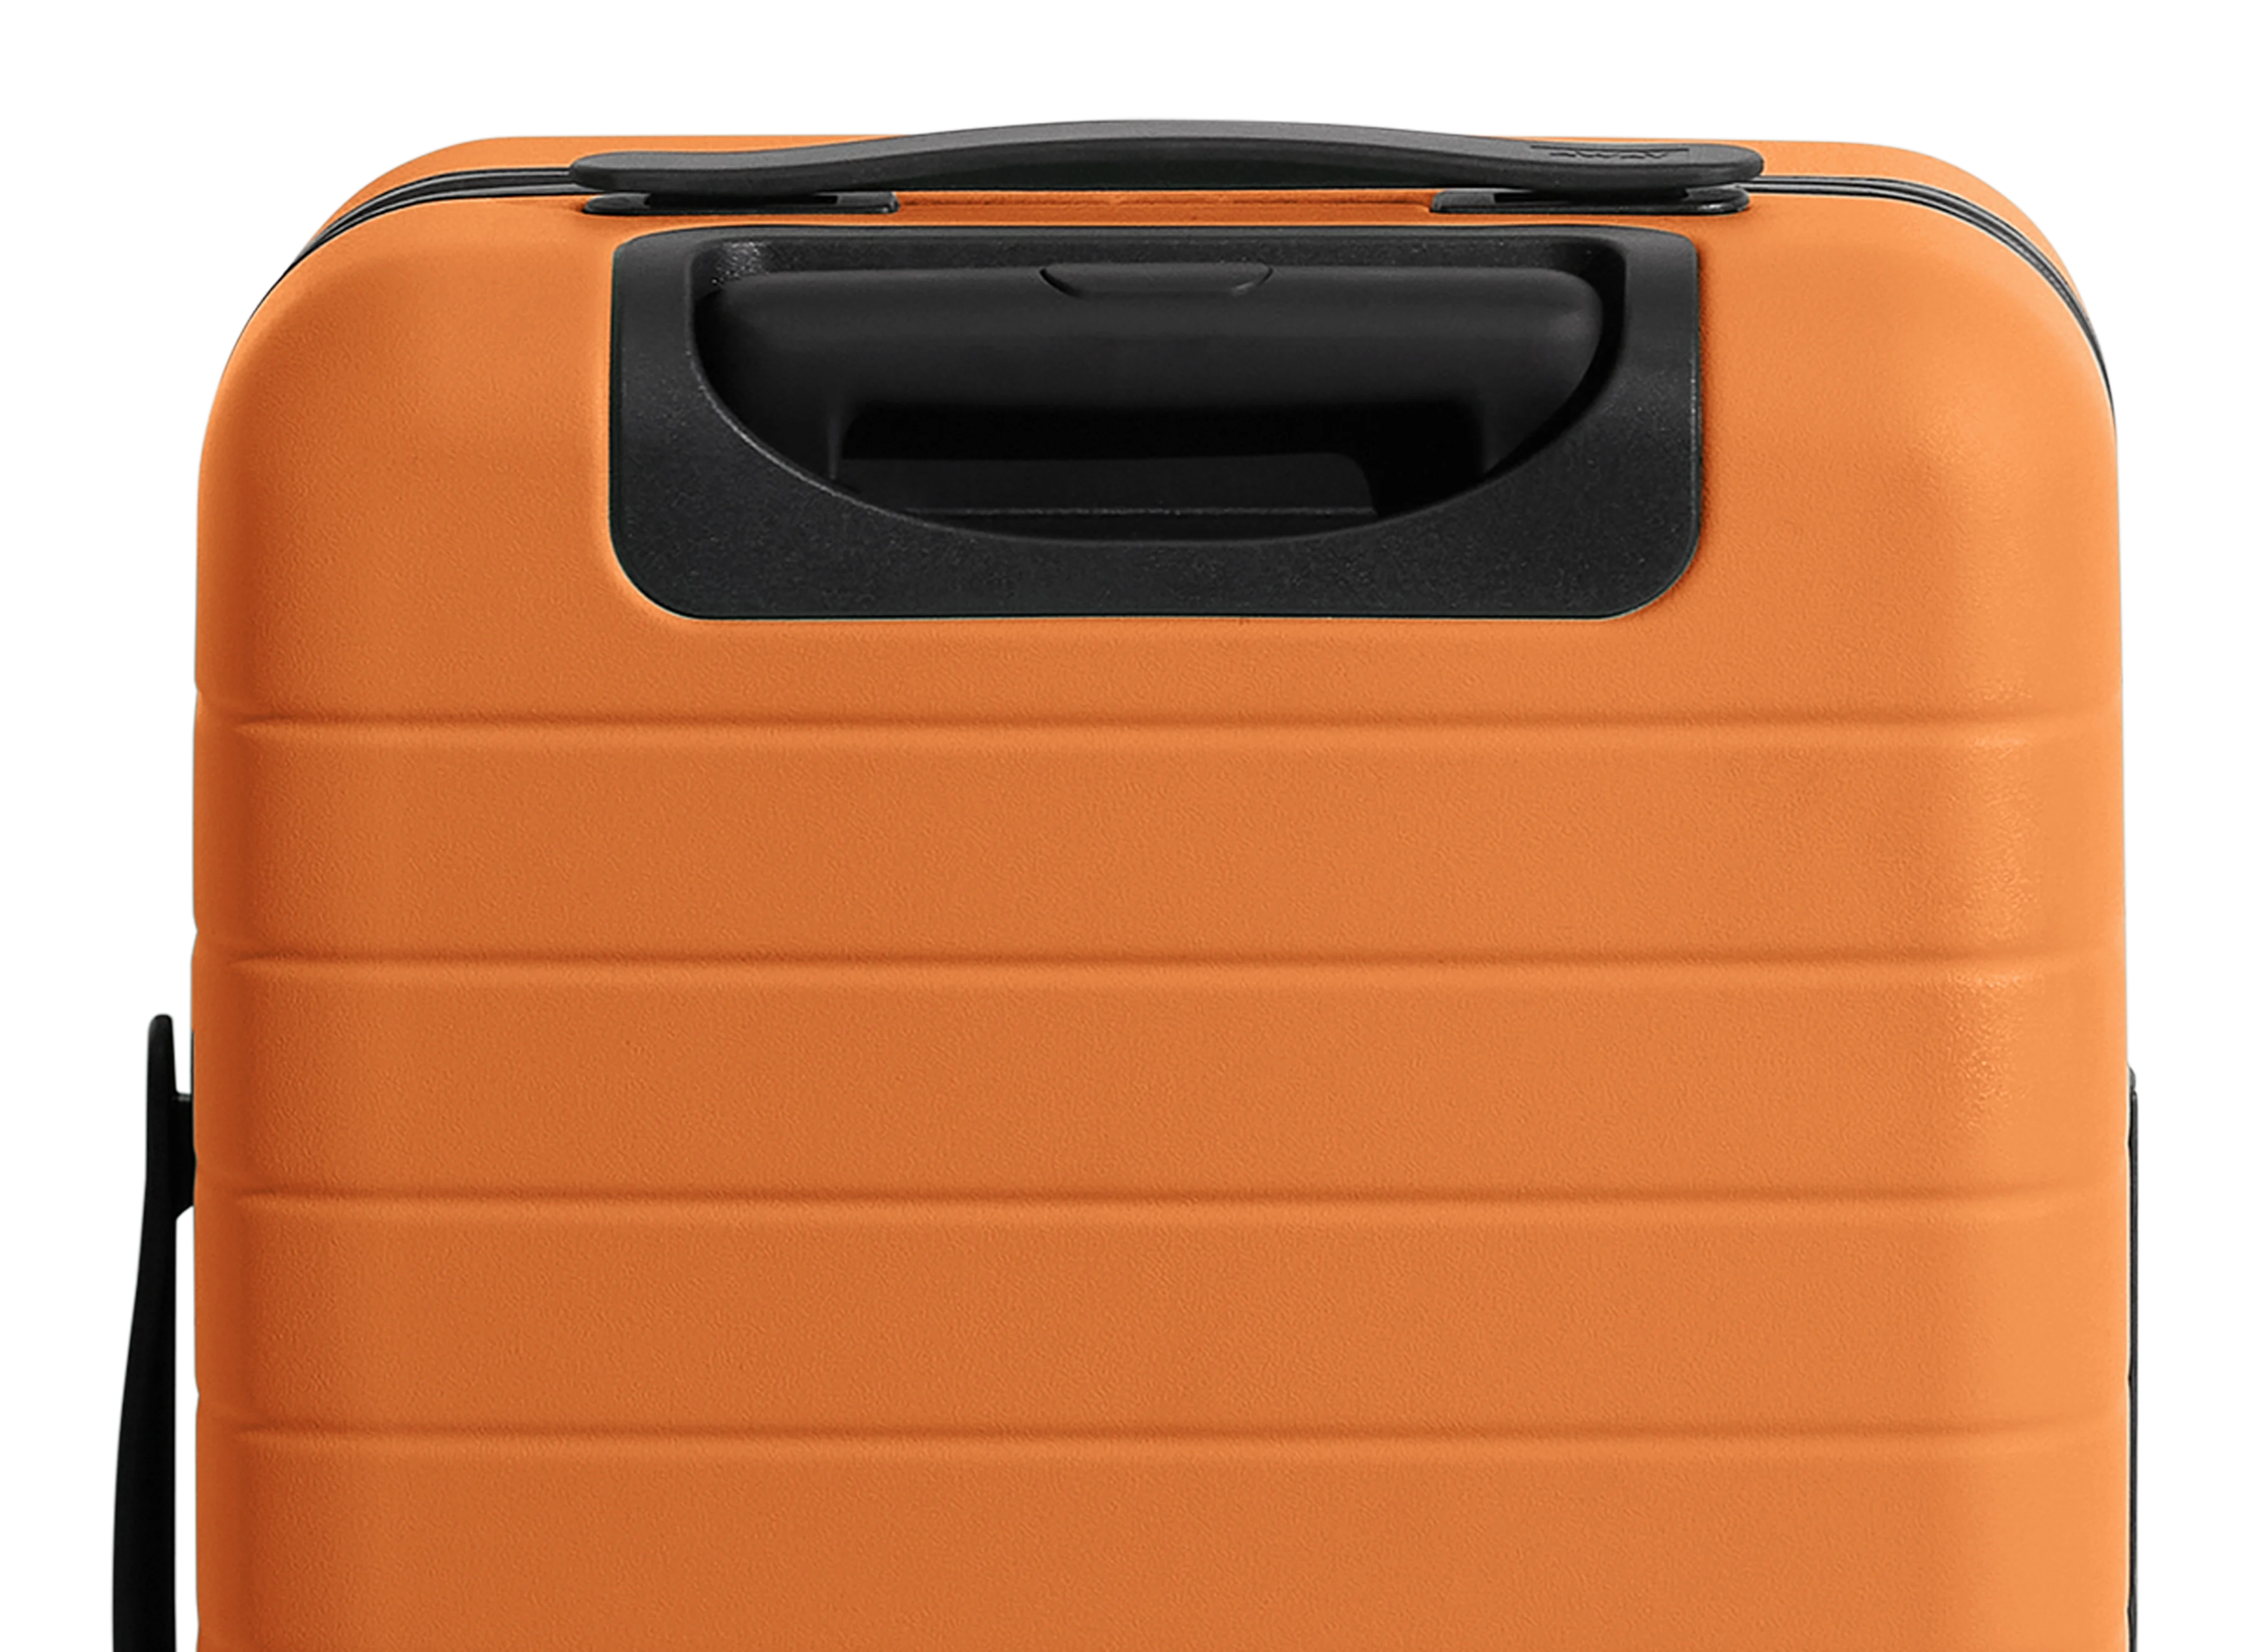 The Carry-On in Sorbet Orange